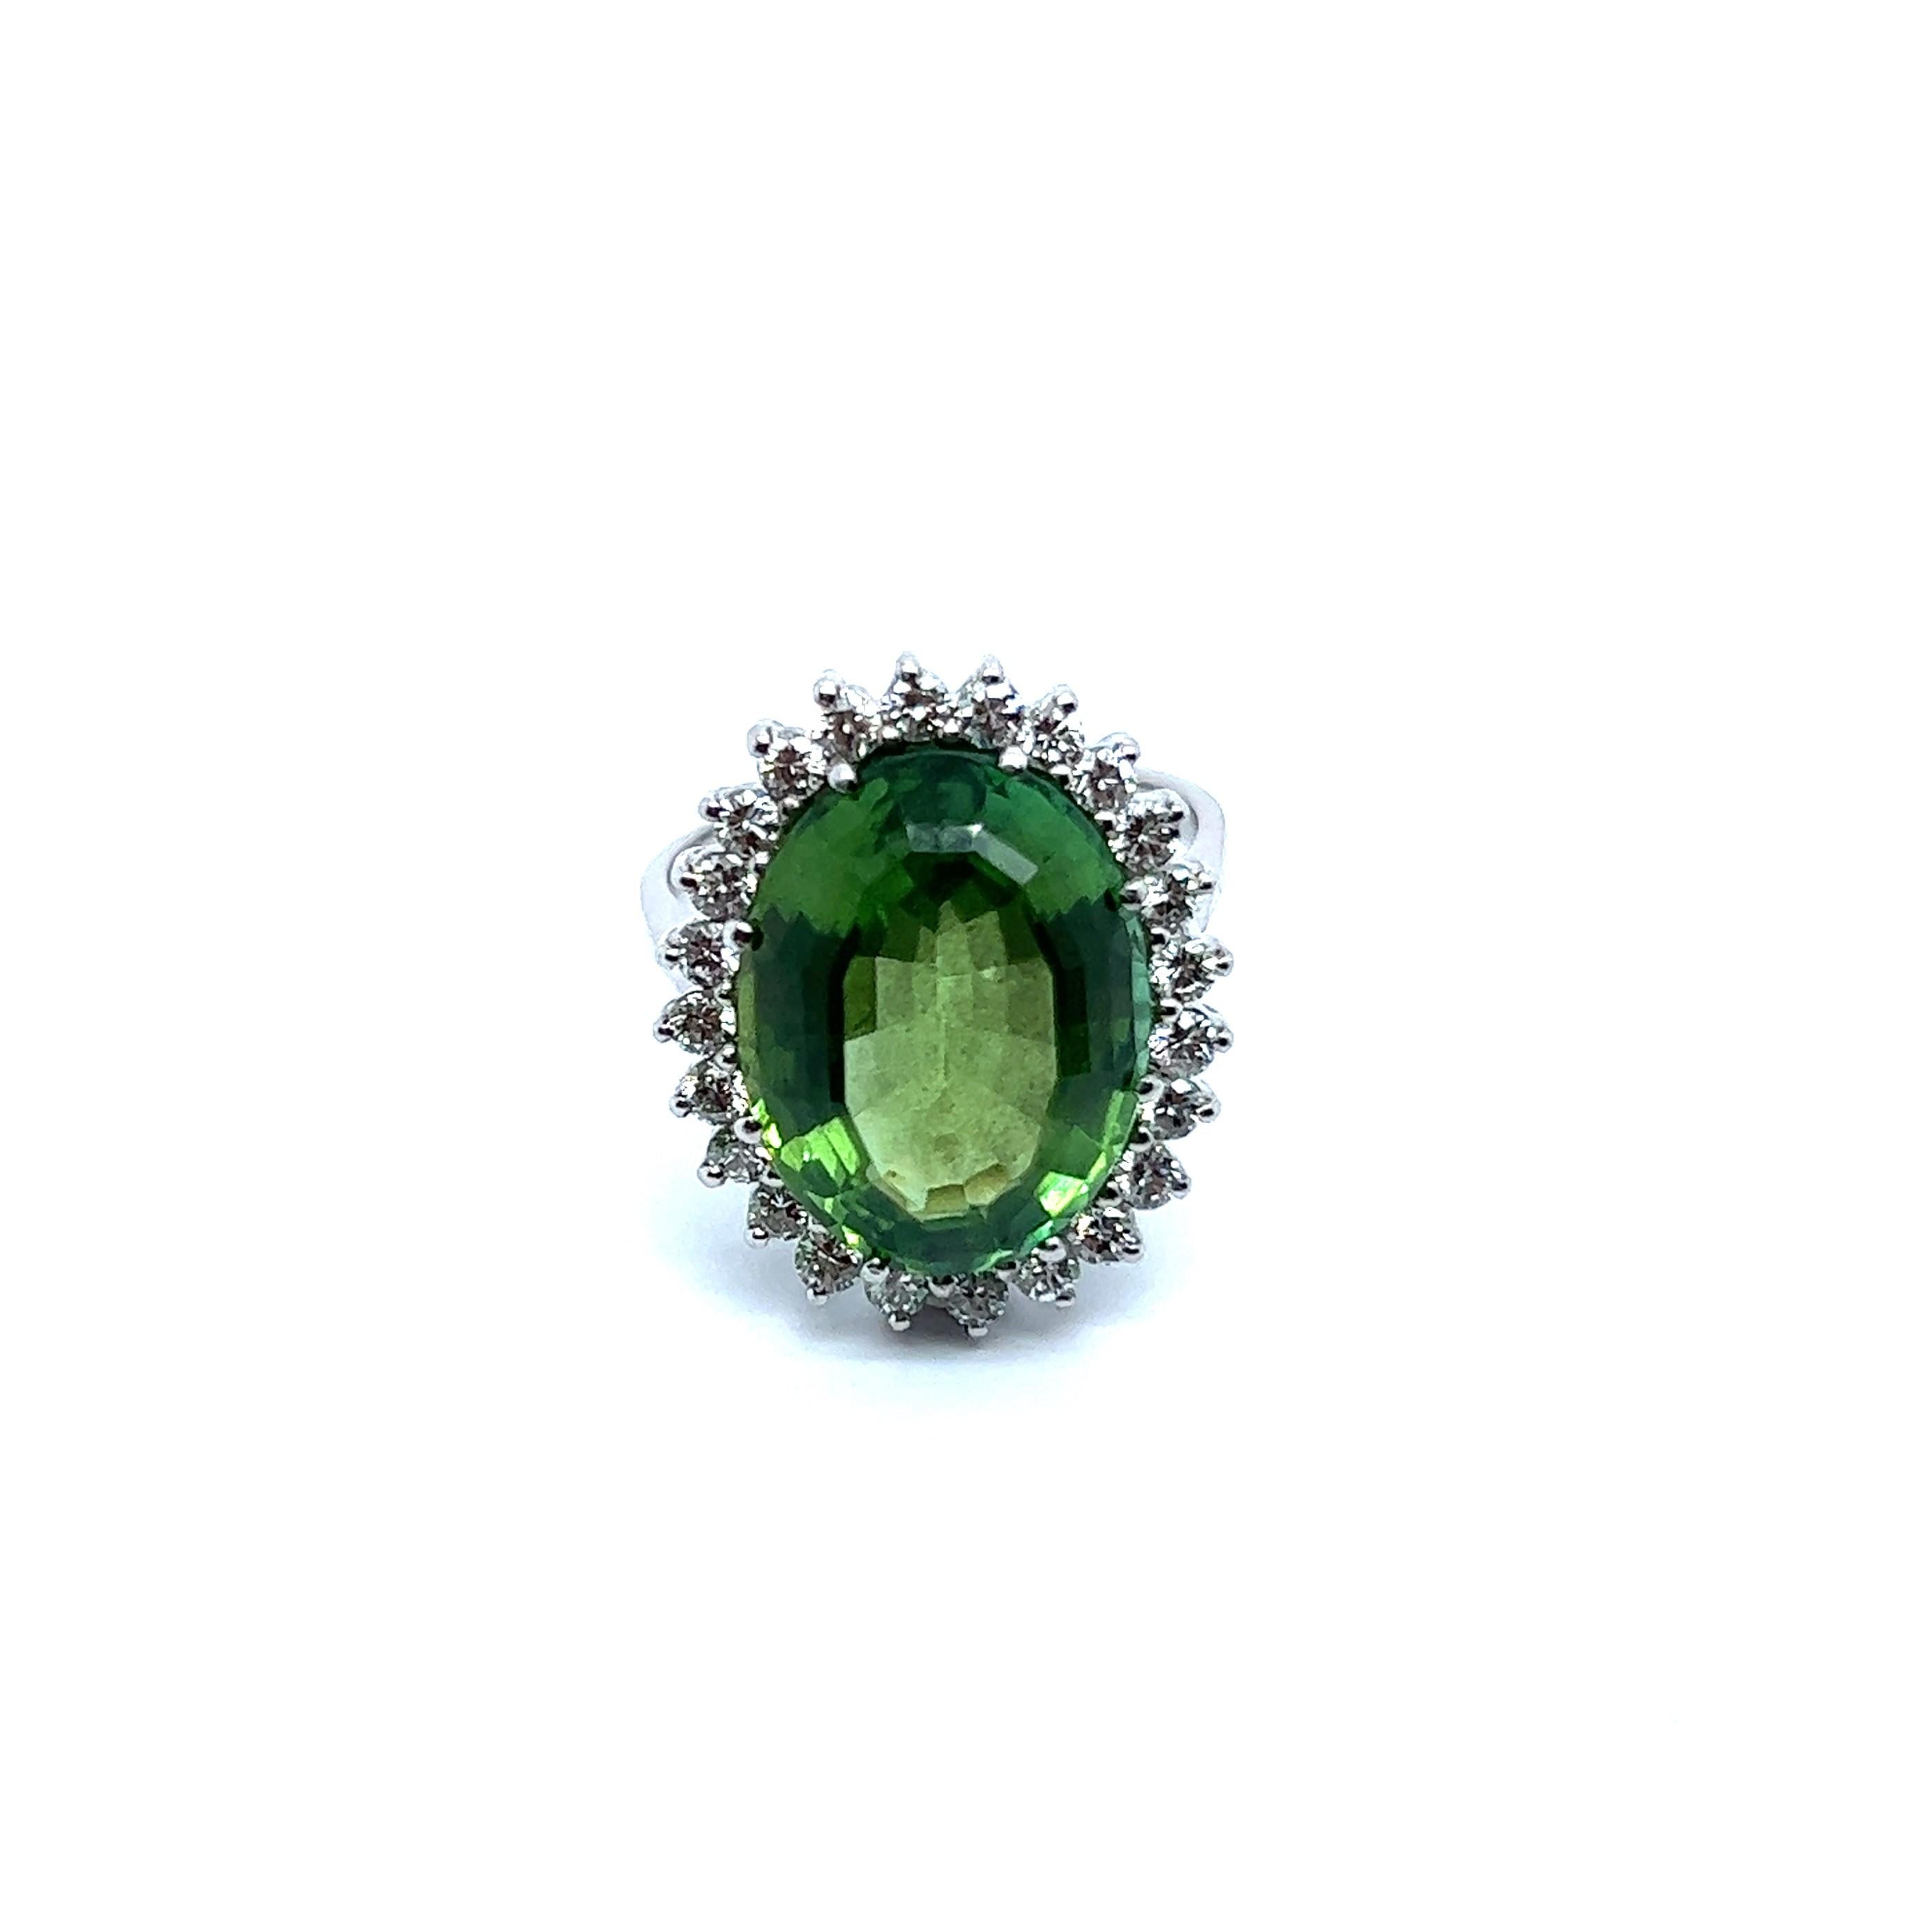 Enchanted ring with tourmaline and diamonds. 

Designed in exquisite 18 Karat white gold, this captivating piece exudes elegance and allure. A resplendent oval-cut green tourmaline lies at its heart, weighing an impressive 9.55 carats. The verdant